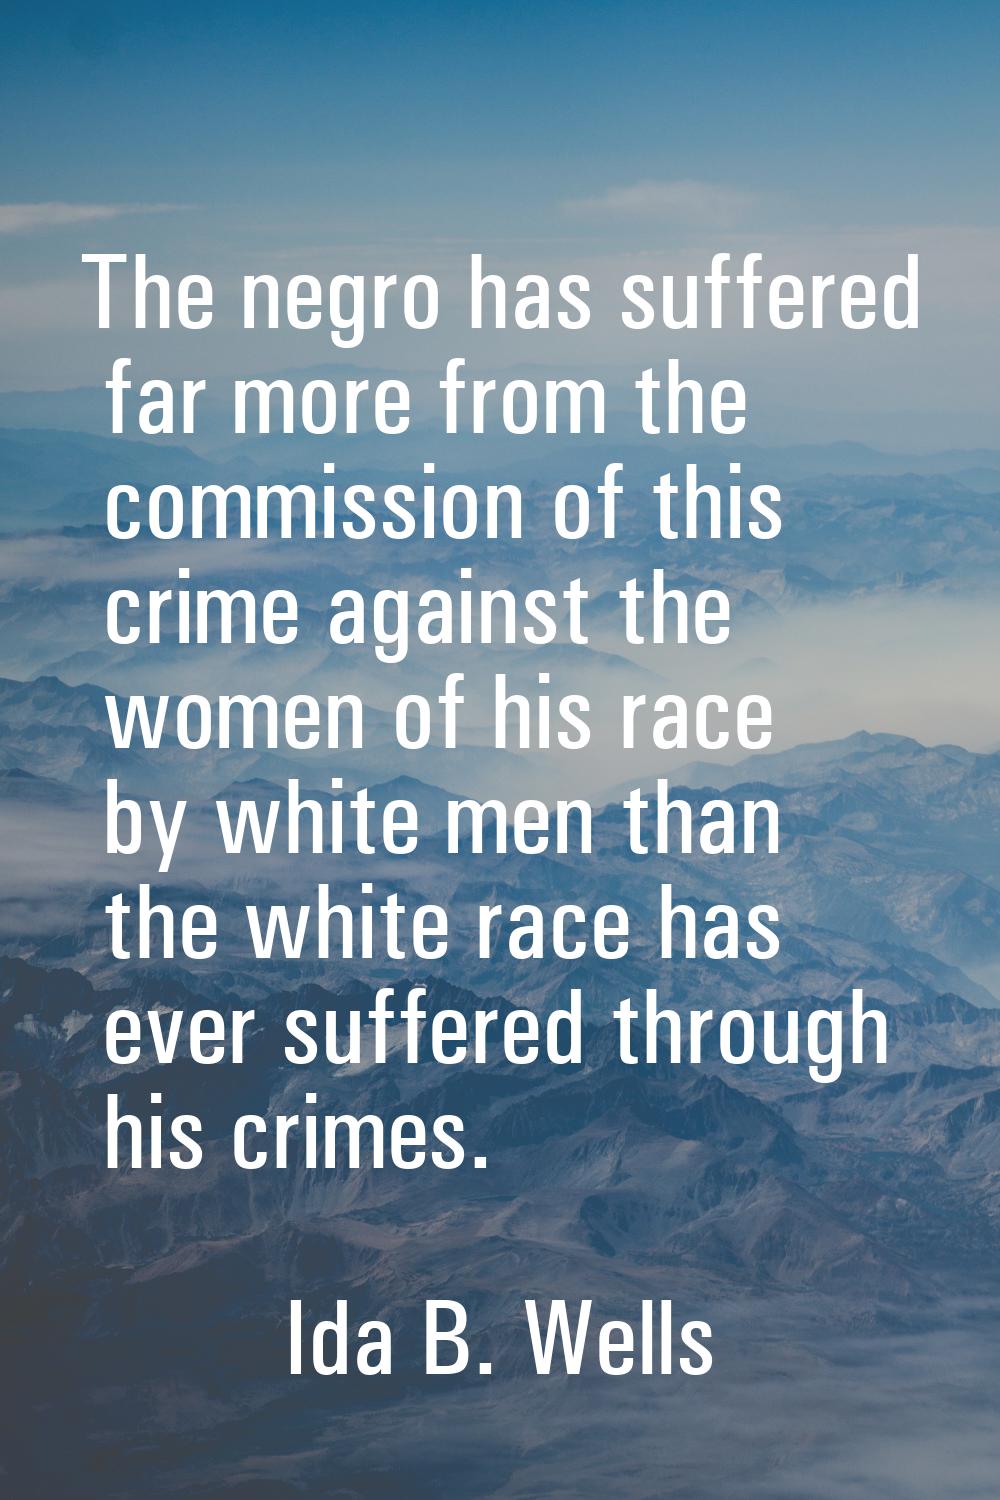 The negro has suffered far more from the commission of this crime against the women of his race by 